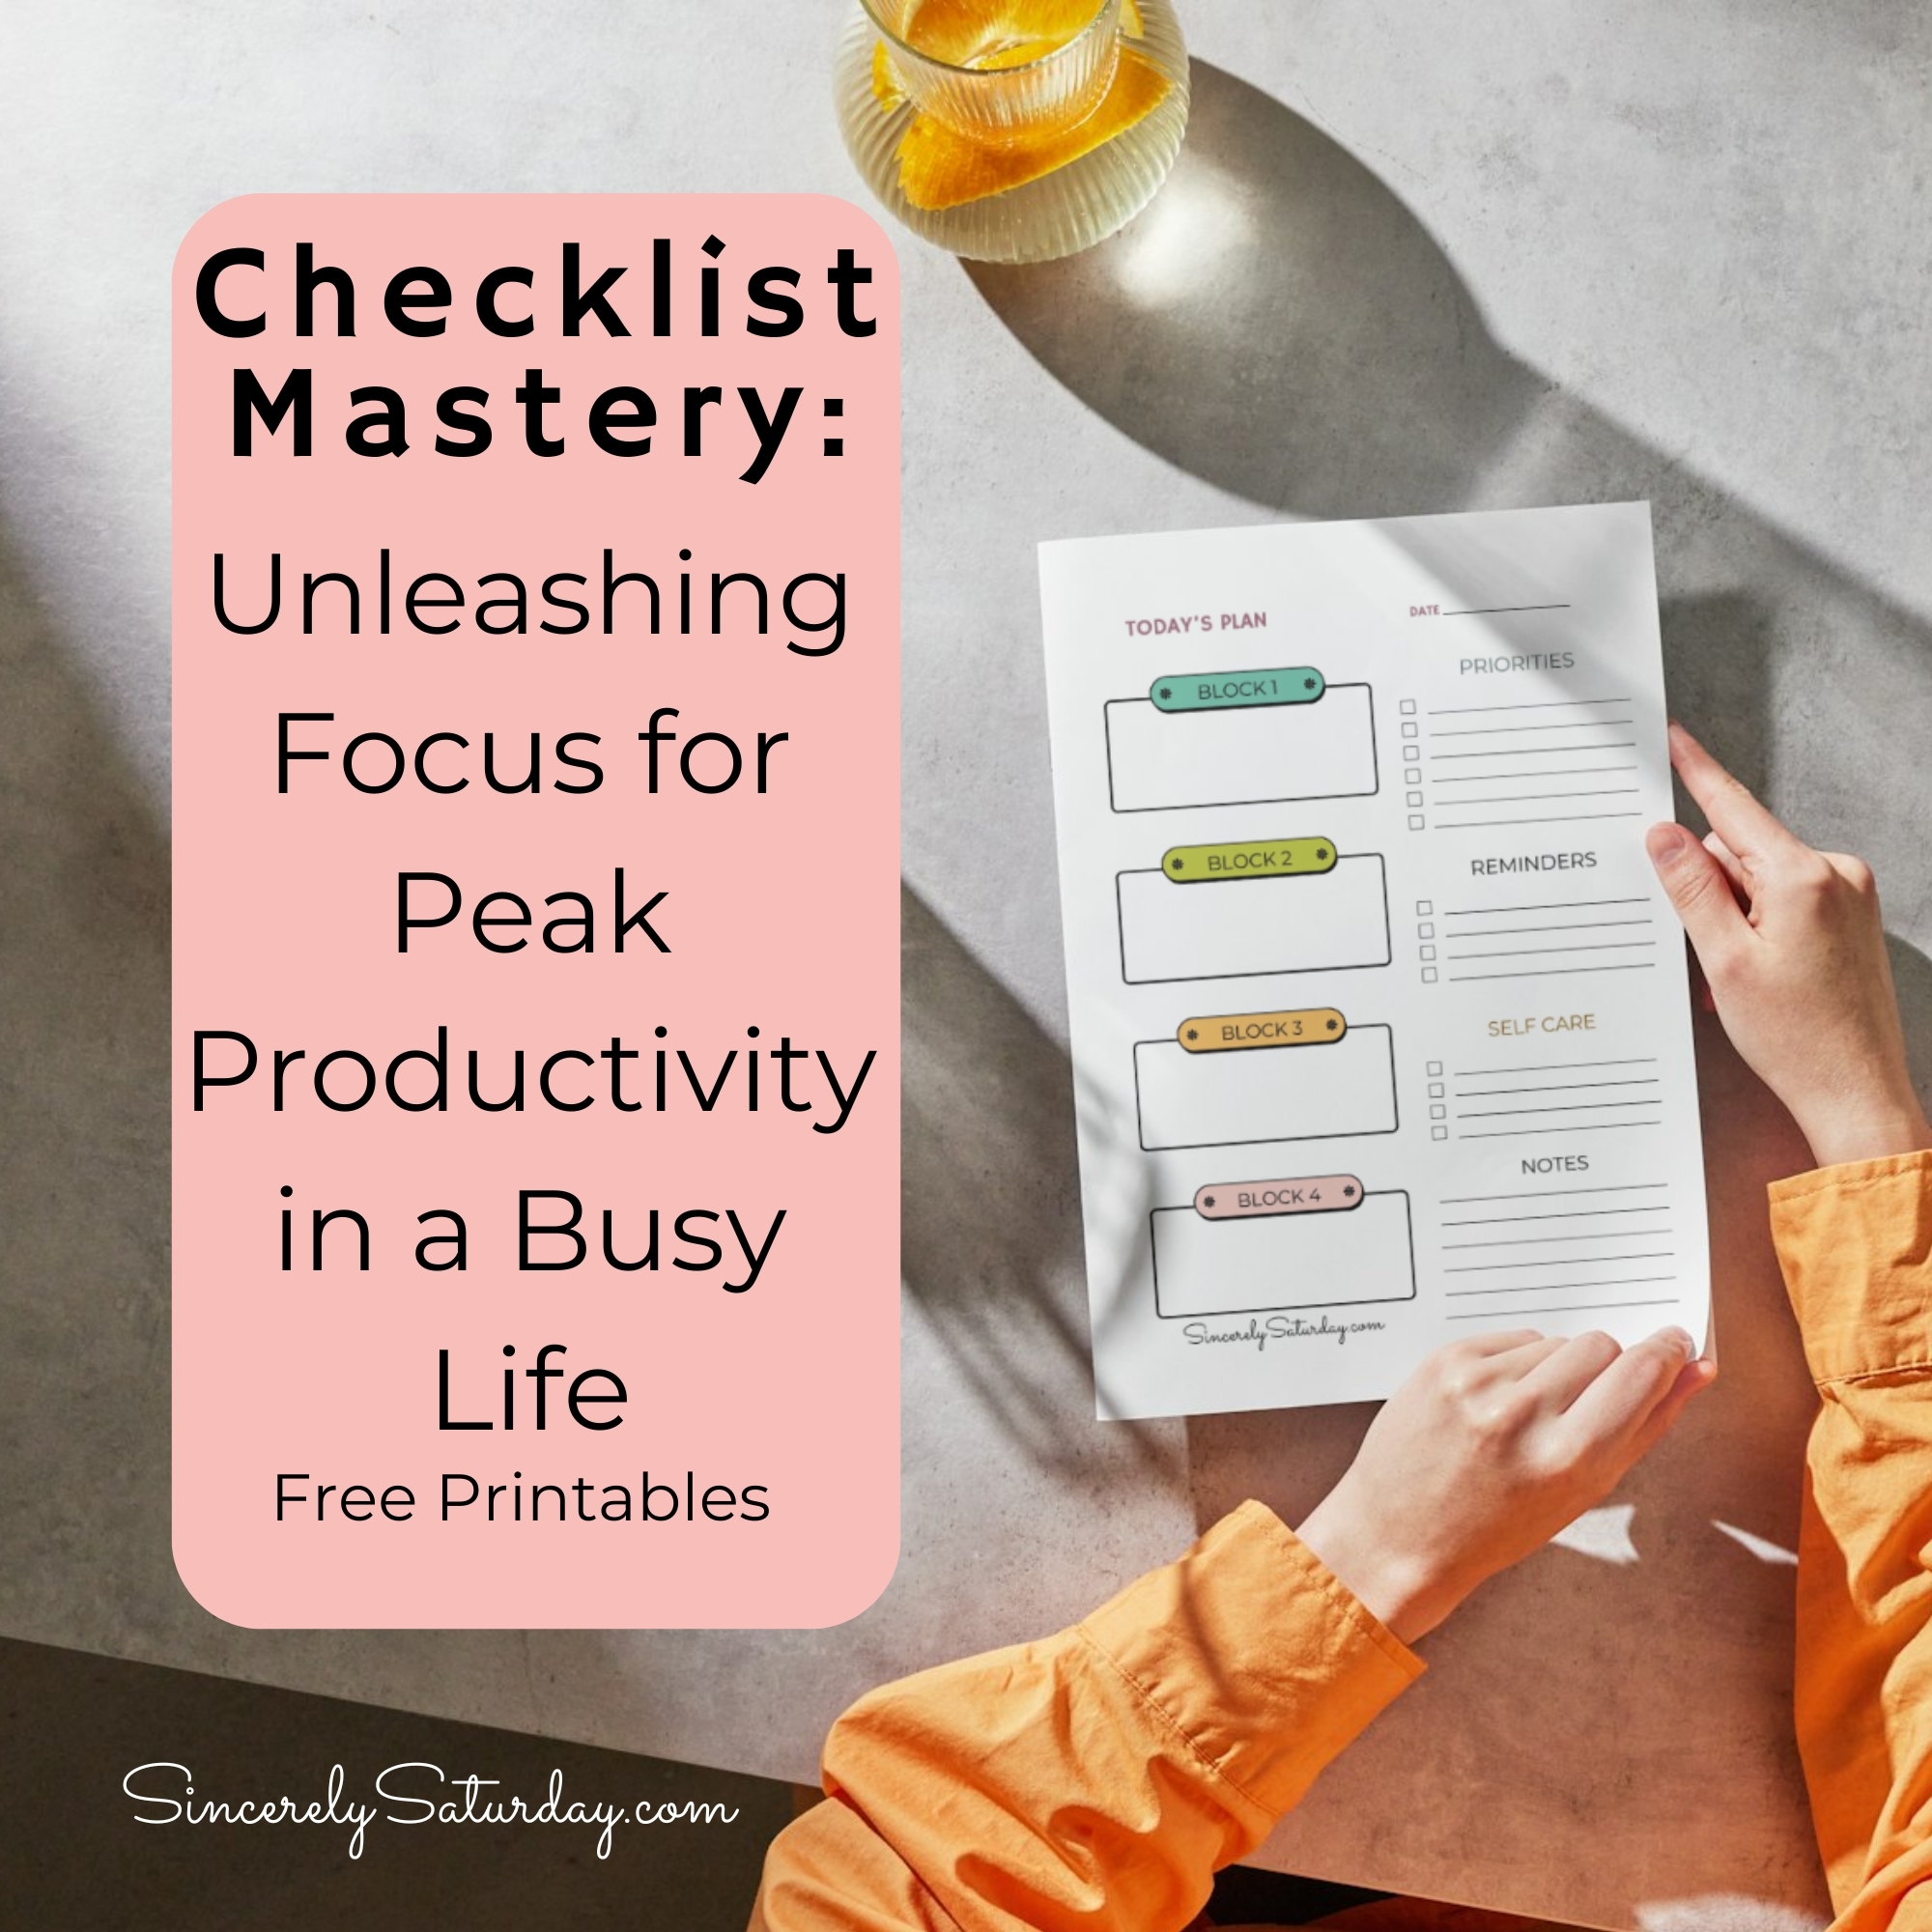 Checklist Mastery: Unleashing Focus for Peak Productivity in a Busy Life